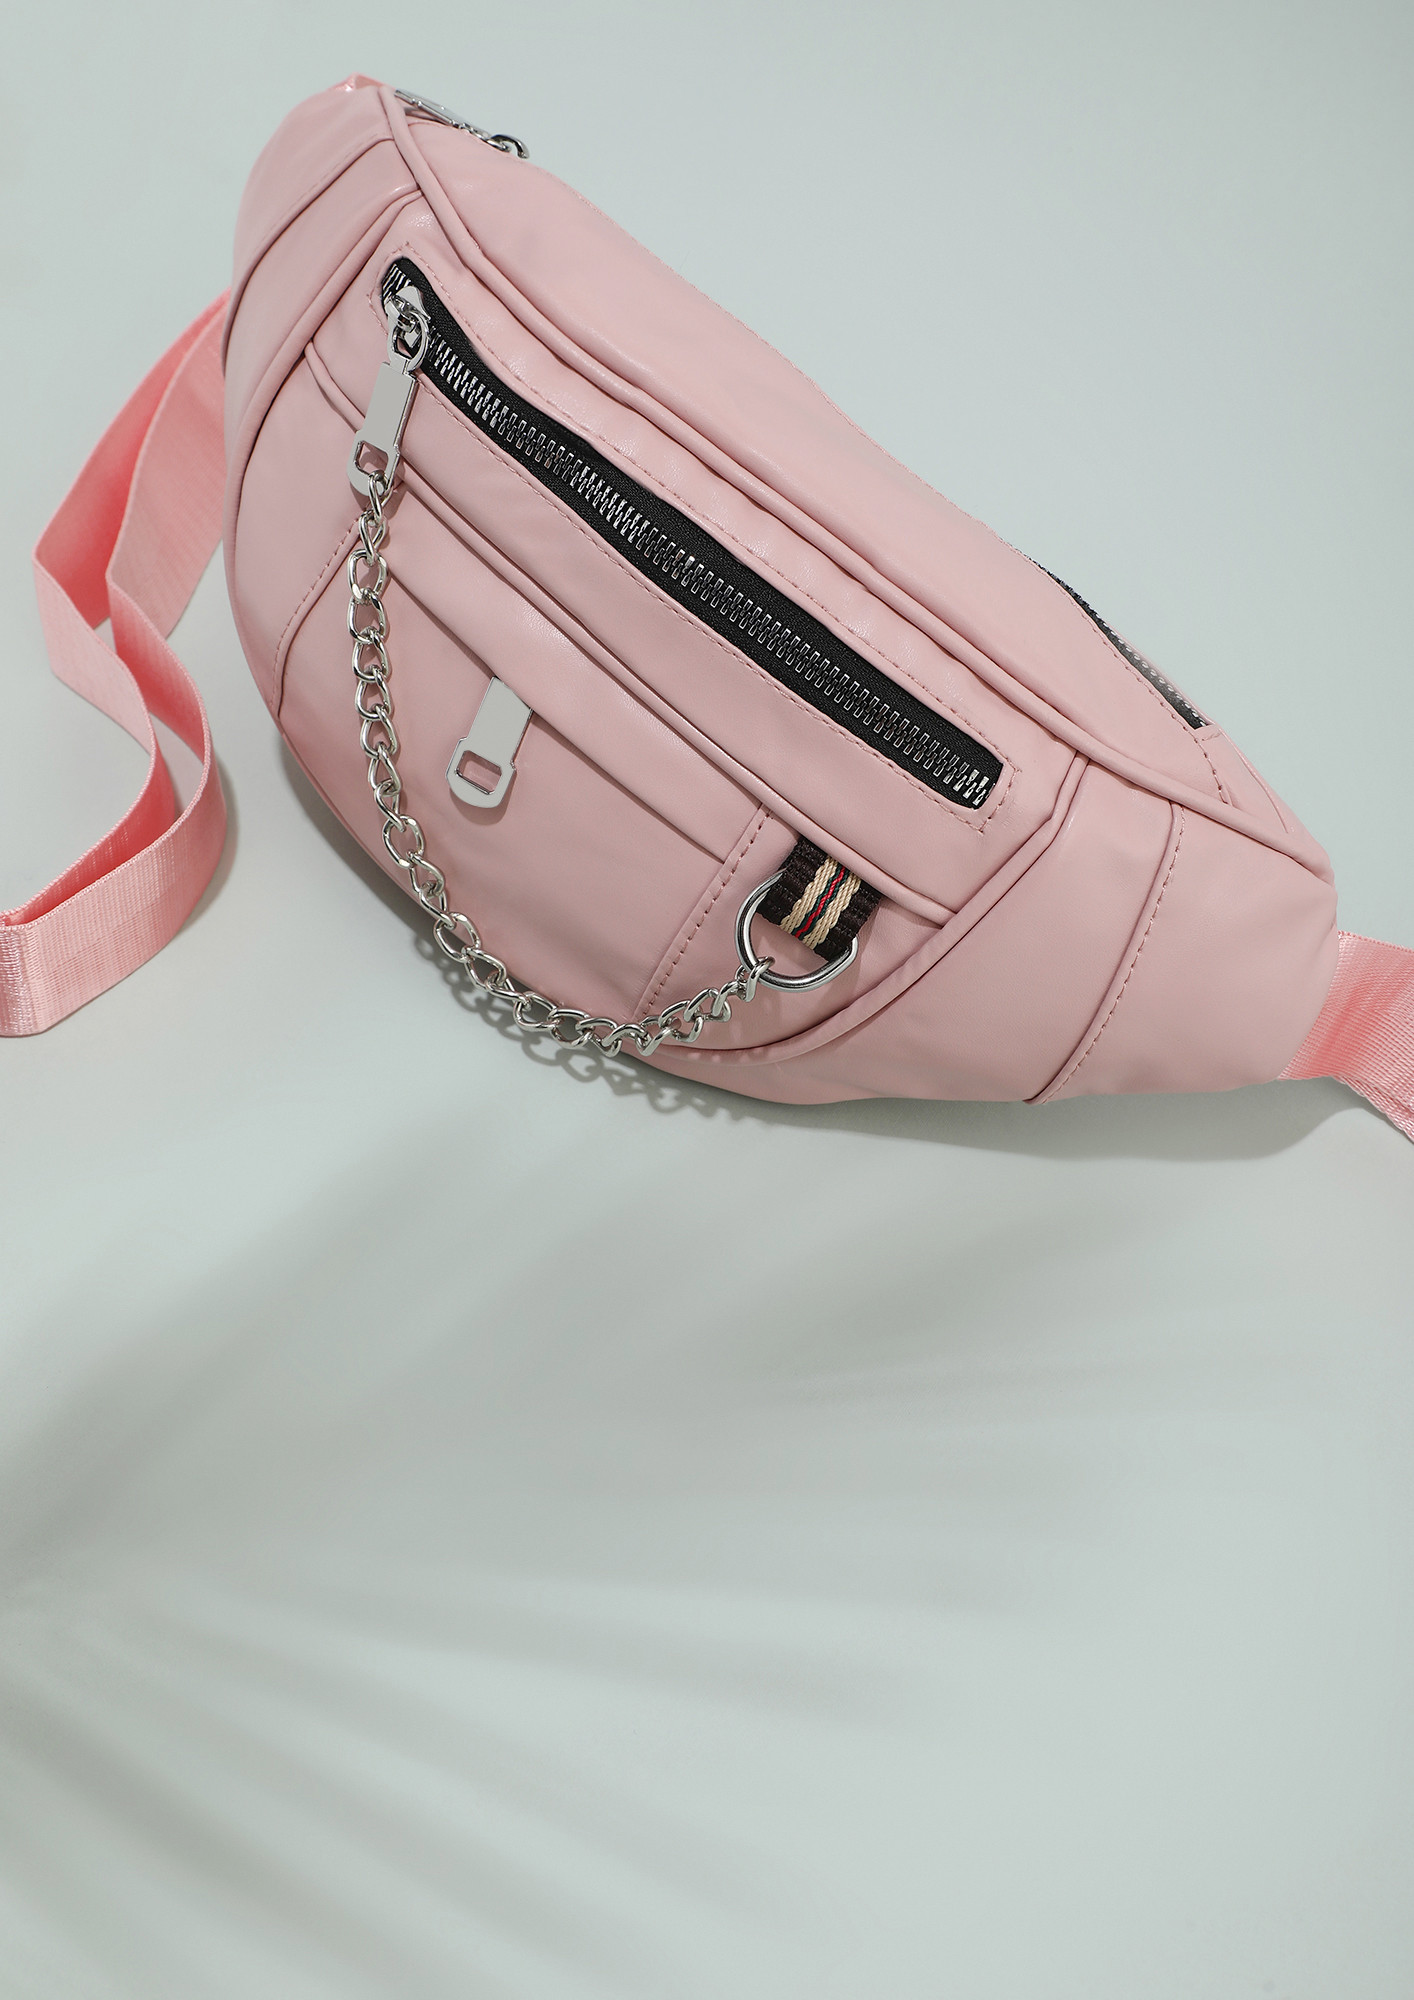 CLOSE TO PASTELS PINK FANNY PACK